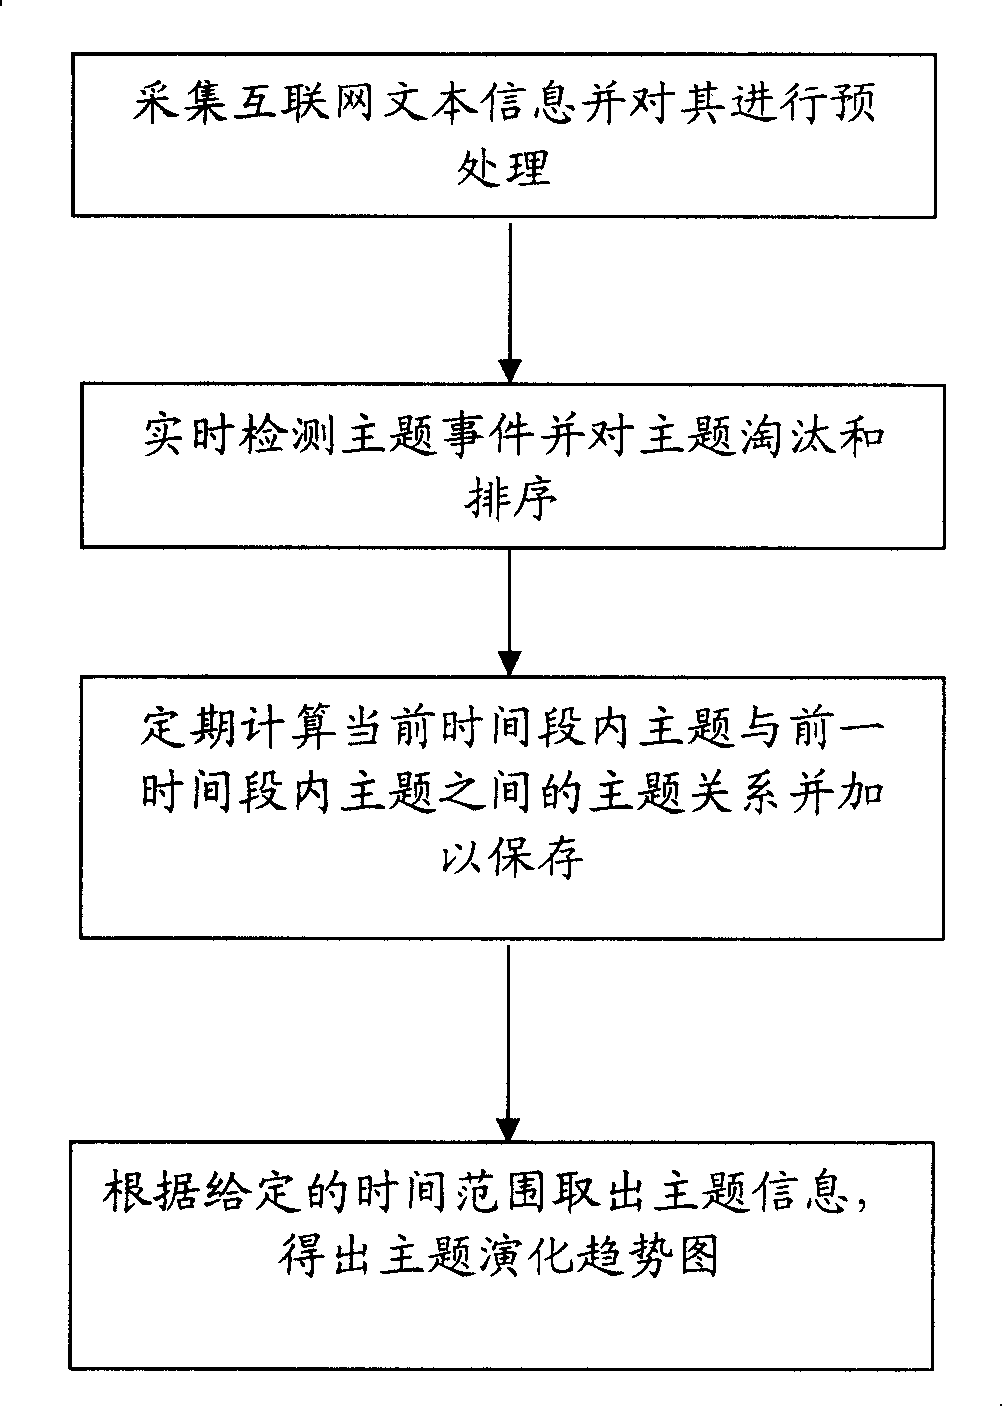 Method and system for automatically computing subject evolution trend in the internet